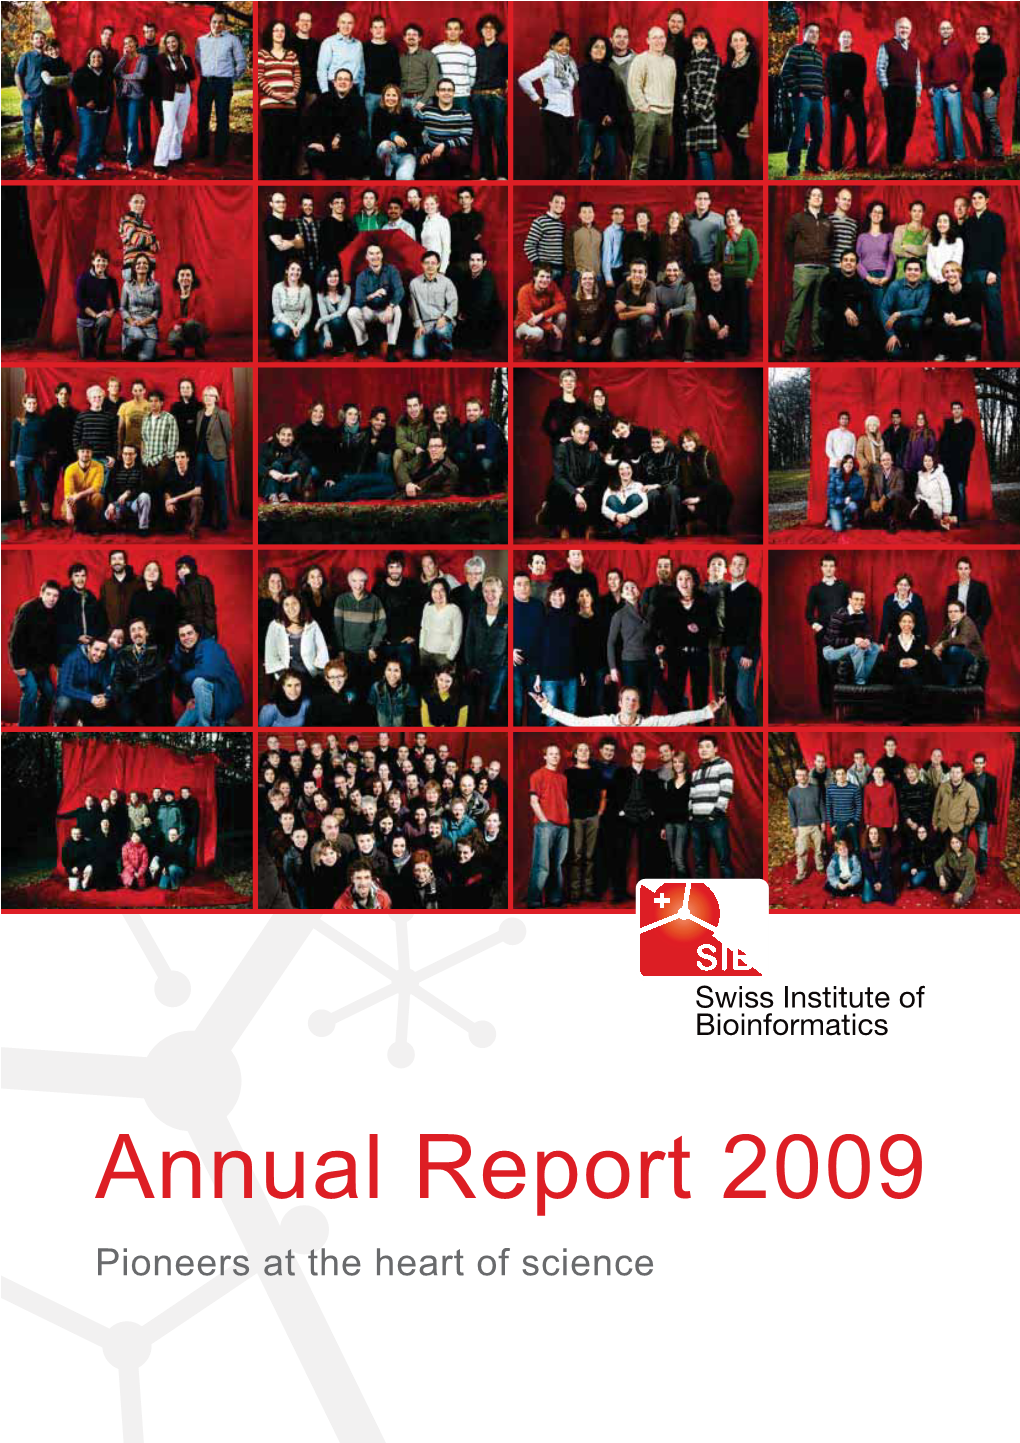 Annual Report 2009 Pioneers at the Heart of Science SIB Swiss Institute of Bioinformatics Annual Report 2009009